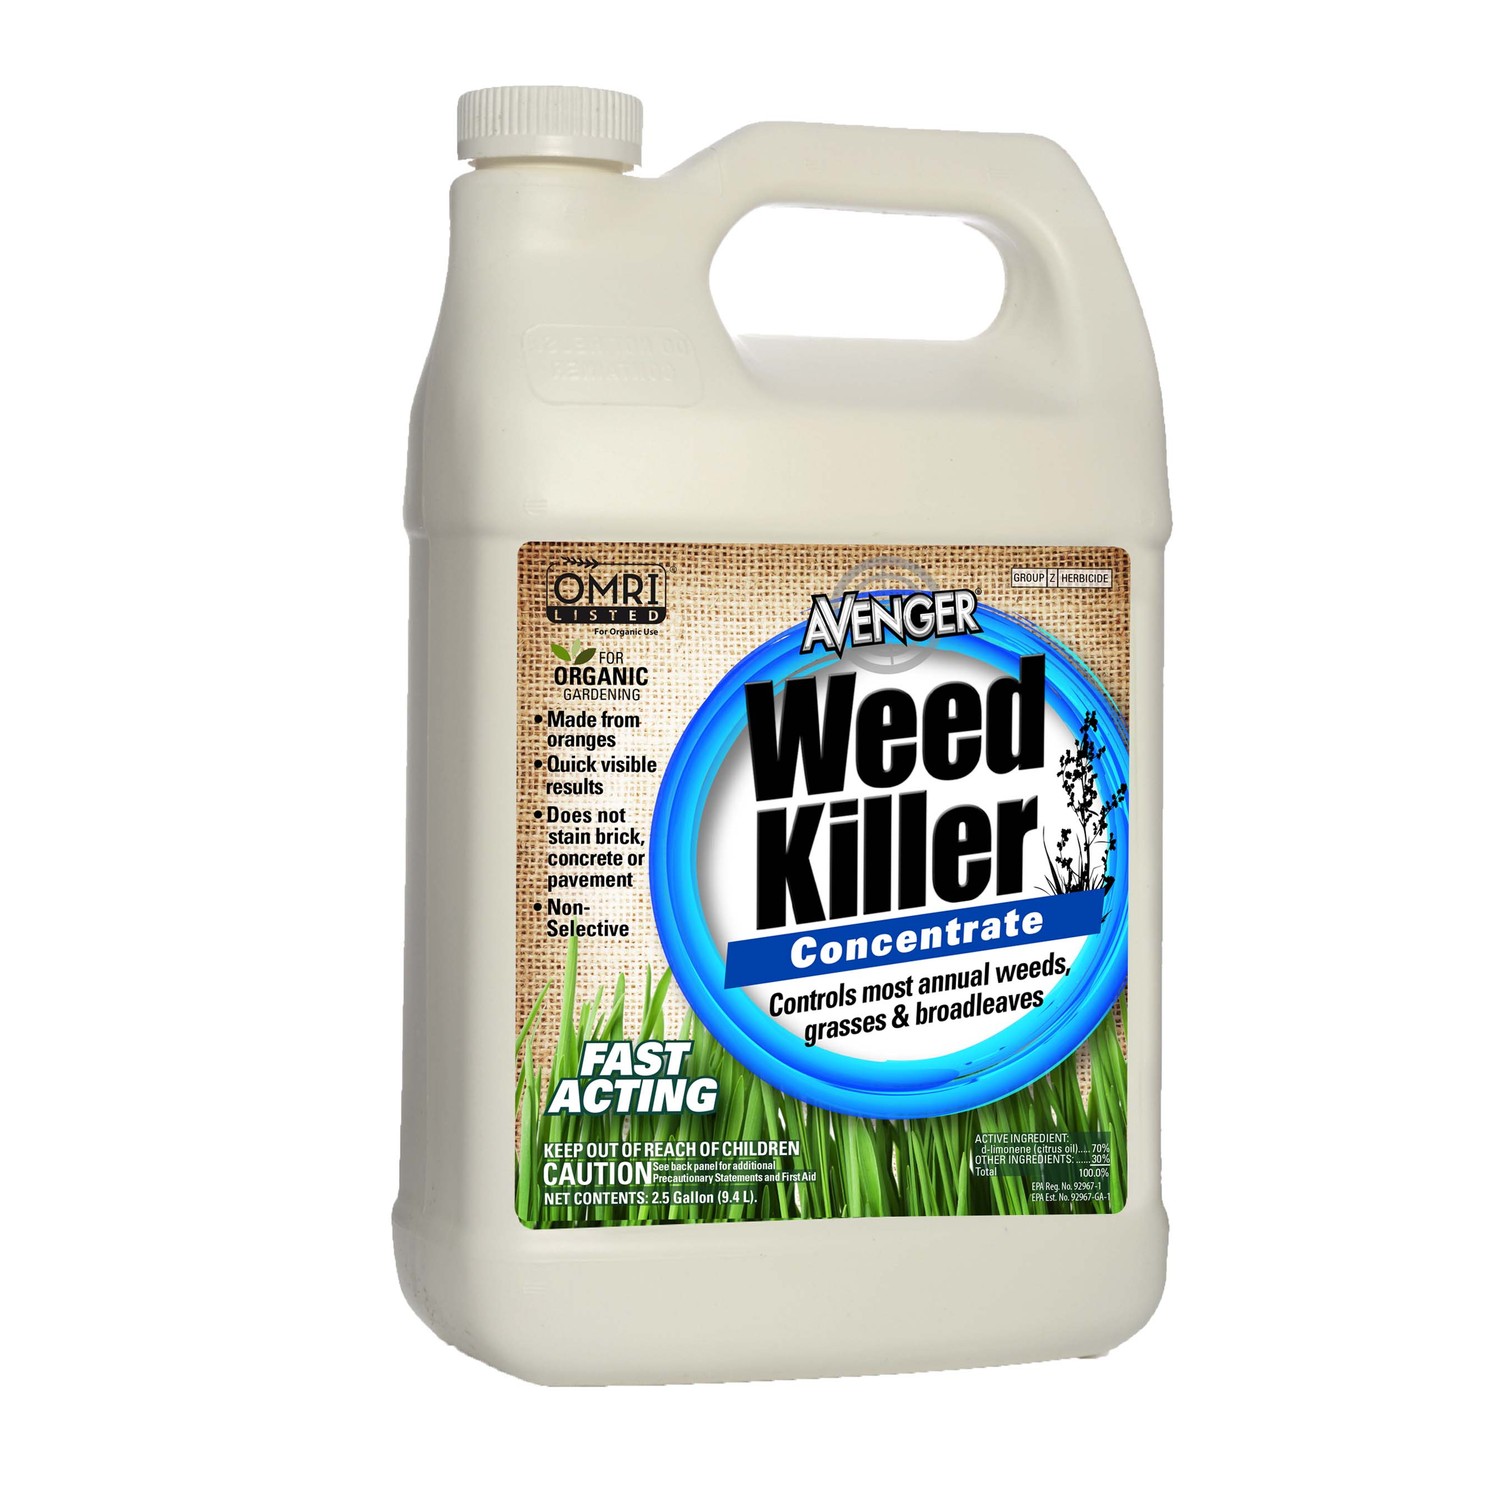 Weedkiller 2.5 gallons